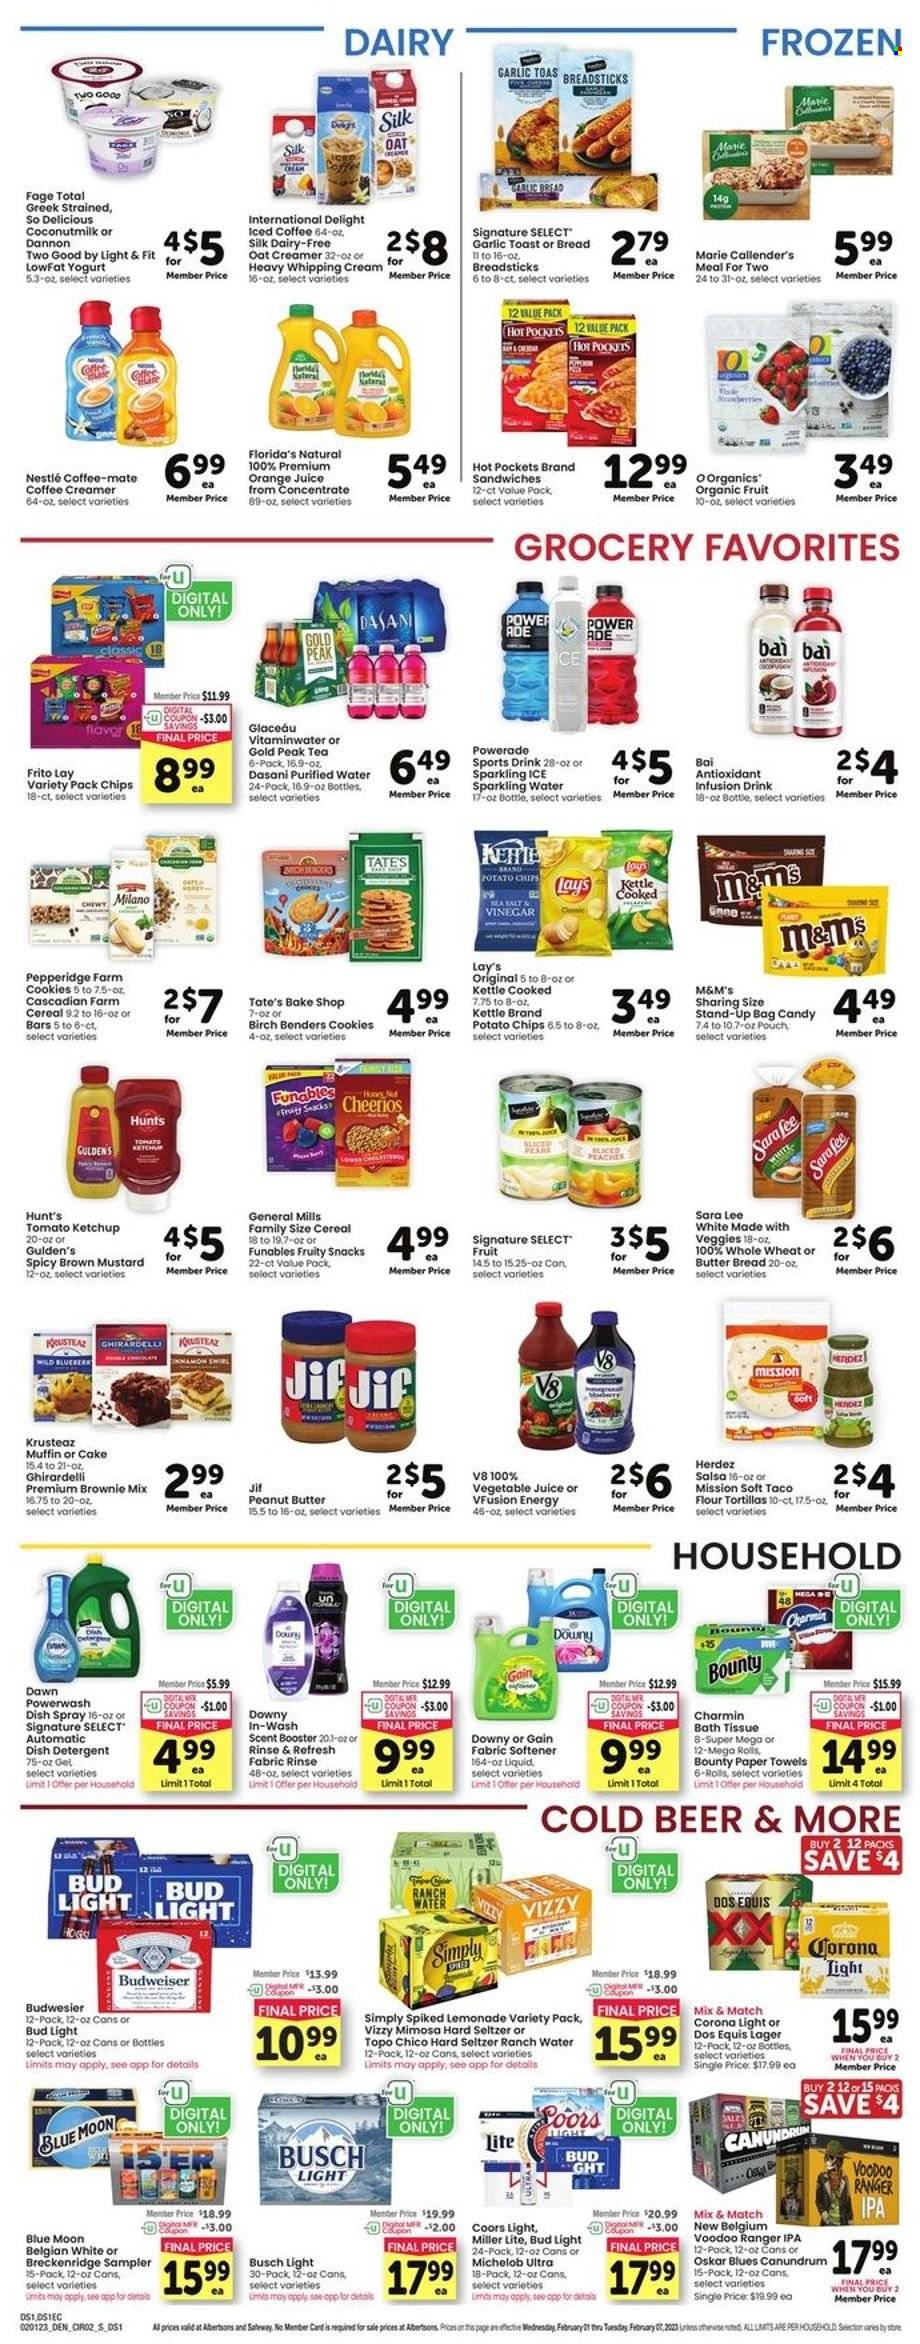 thumbnail - Safeway Flyer - 02/01/2023 - 02/07/2023 - Sales products - bread, tortillas, cake, Sara Lee, flour tortillas, hot pocket, sandwich, Marie Callender's, yoghurt, Dannon, Coffee-Mate, Silk, creamer, whipping cream, cookies, Nestlé, snack, Bounty, M&M's, Ghirardelli, Florida's Natural, bread sticks, potato chips, Lay’s, coconut milk, cereals, Cheerios, mustard, ketchup, salsa, peanut butter, Jif, lemonade, Powerade, orange juice, juice, Gold Peak Tea, vegetable juice, Bai, sparkling water, purified water, iced coffee, tea, Hard Seltzer, beer, Busch, Bud Light, Corona Extra, Lager, IPA, bath tissue, kitchen towels, paper towels, Charmin, detergent, Gain, fabric softener, dishwasher cleaner, Budweiser, Miller Lite, Coors, Dos Equis, Blue Moon, Michelob. Page 2.